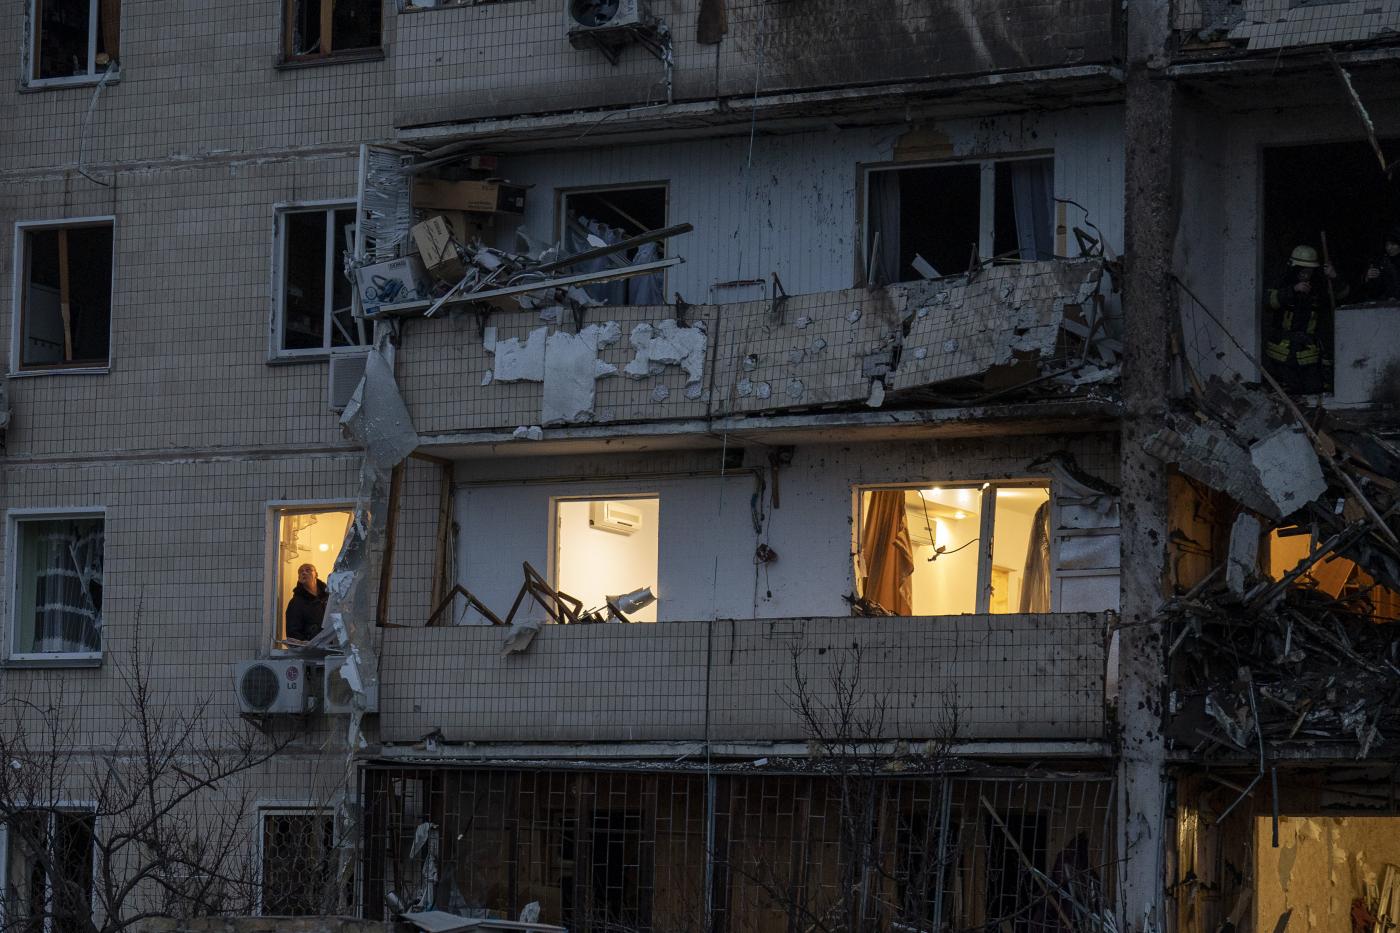 A fire-fighter inspects the damage at a building following a rocket attack on the city of Kyiv, Ukraine, Friday, Feb. 25, 2022. (AP Photo/Emilio Morenatti)